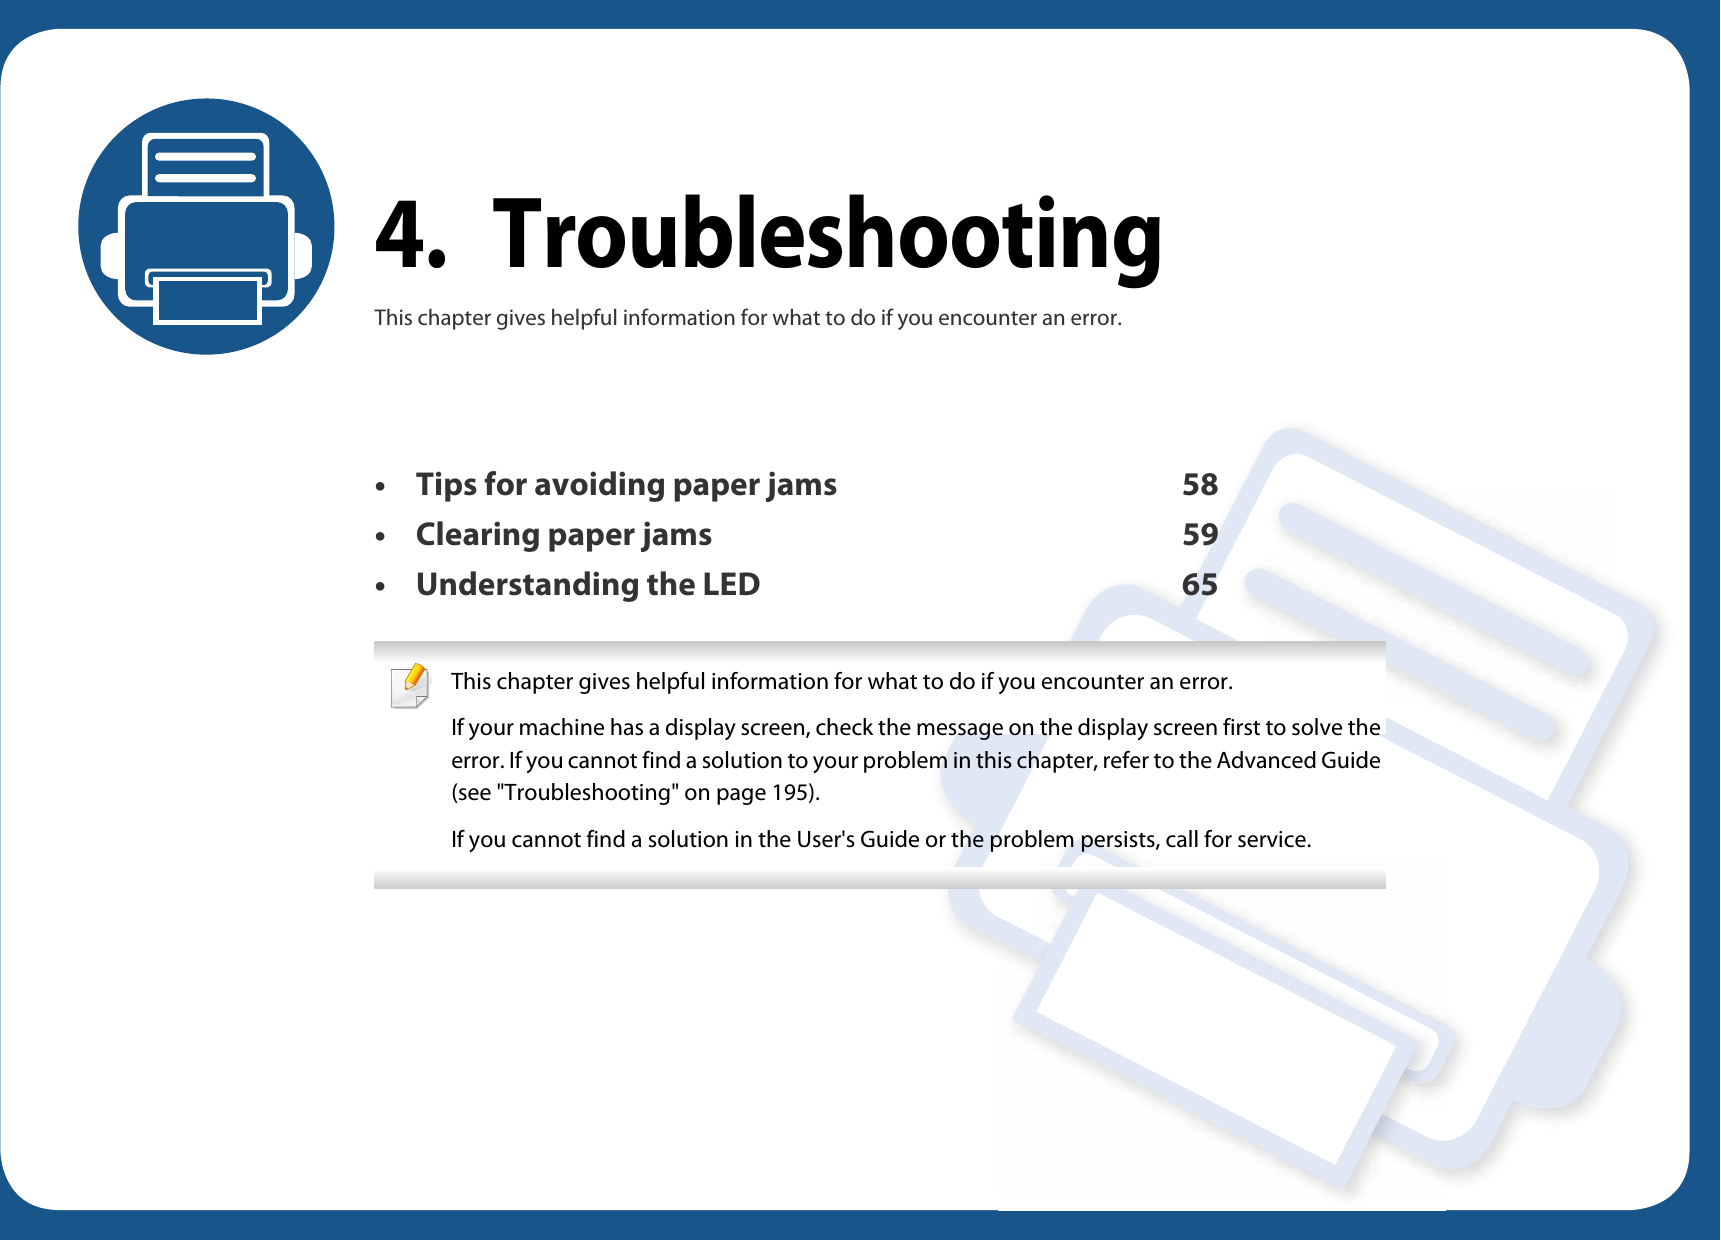 4. TroubleshootingThis chapter gives helpful information for what to do if you encounter an error.• Tips for avoiding paper jams 58• Clearing paper jams 59• Understanding the LED 65 This chapter gives helpful information for what to do if you encounter an error.If your machine has a display screen, check the message on the display screen first to solve the error. If you cannot find a solution to your problem in this chapter, refer to the Advanced Guide (see &quot;Troubleshooting&quot; on page 195).If you cannot find a solution in the User&apos;s Guide or the problem persists, call for service.  